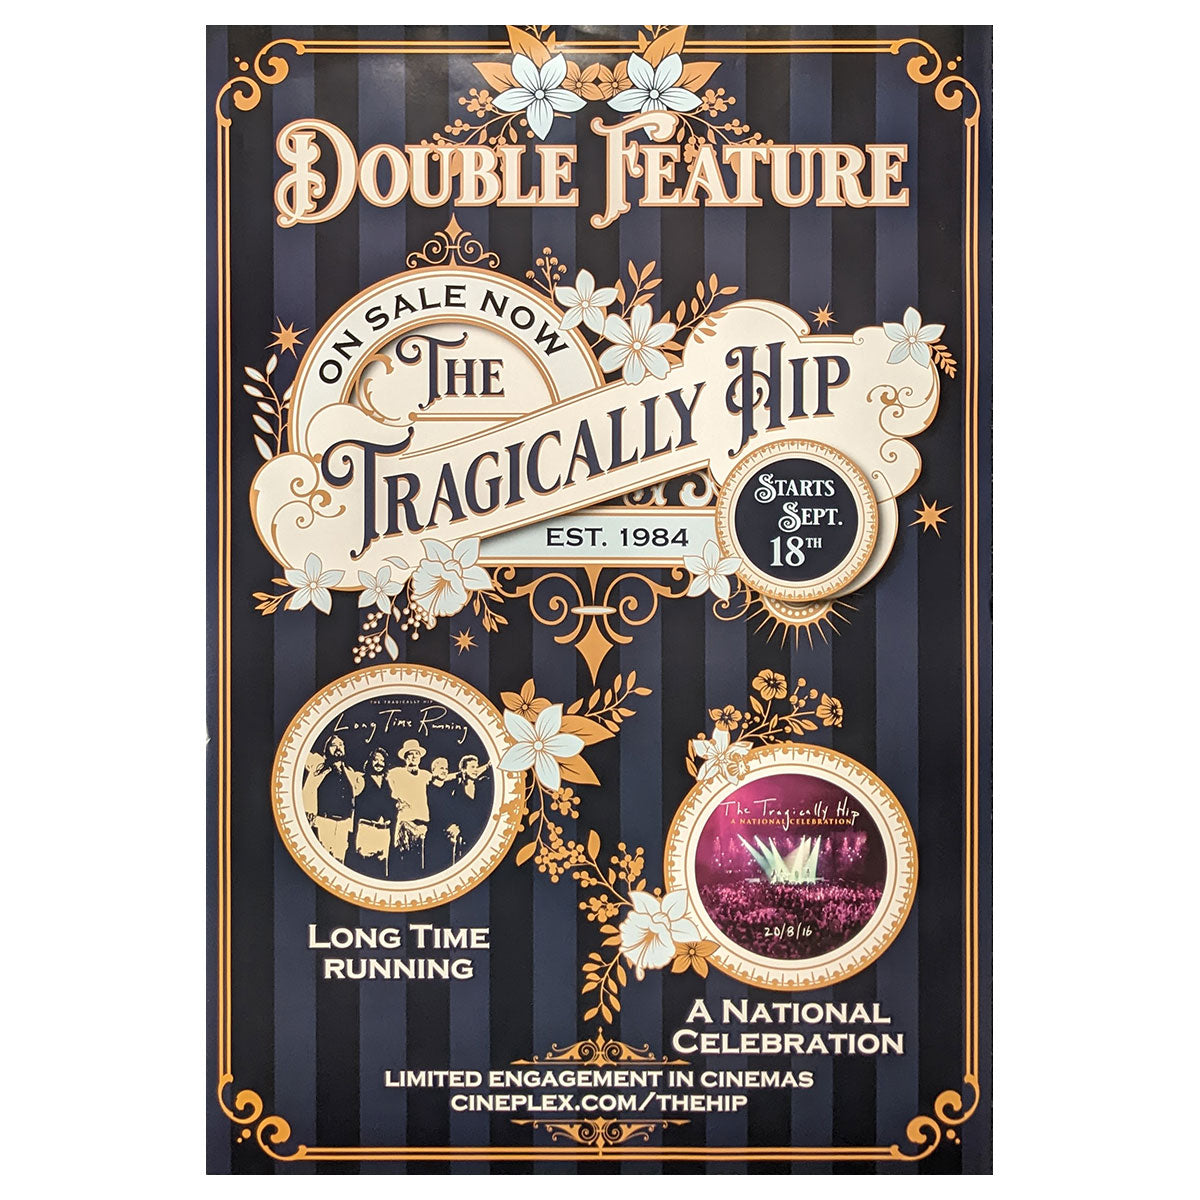 THE TRAGICALLY HIP Double Feature Poster